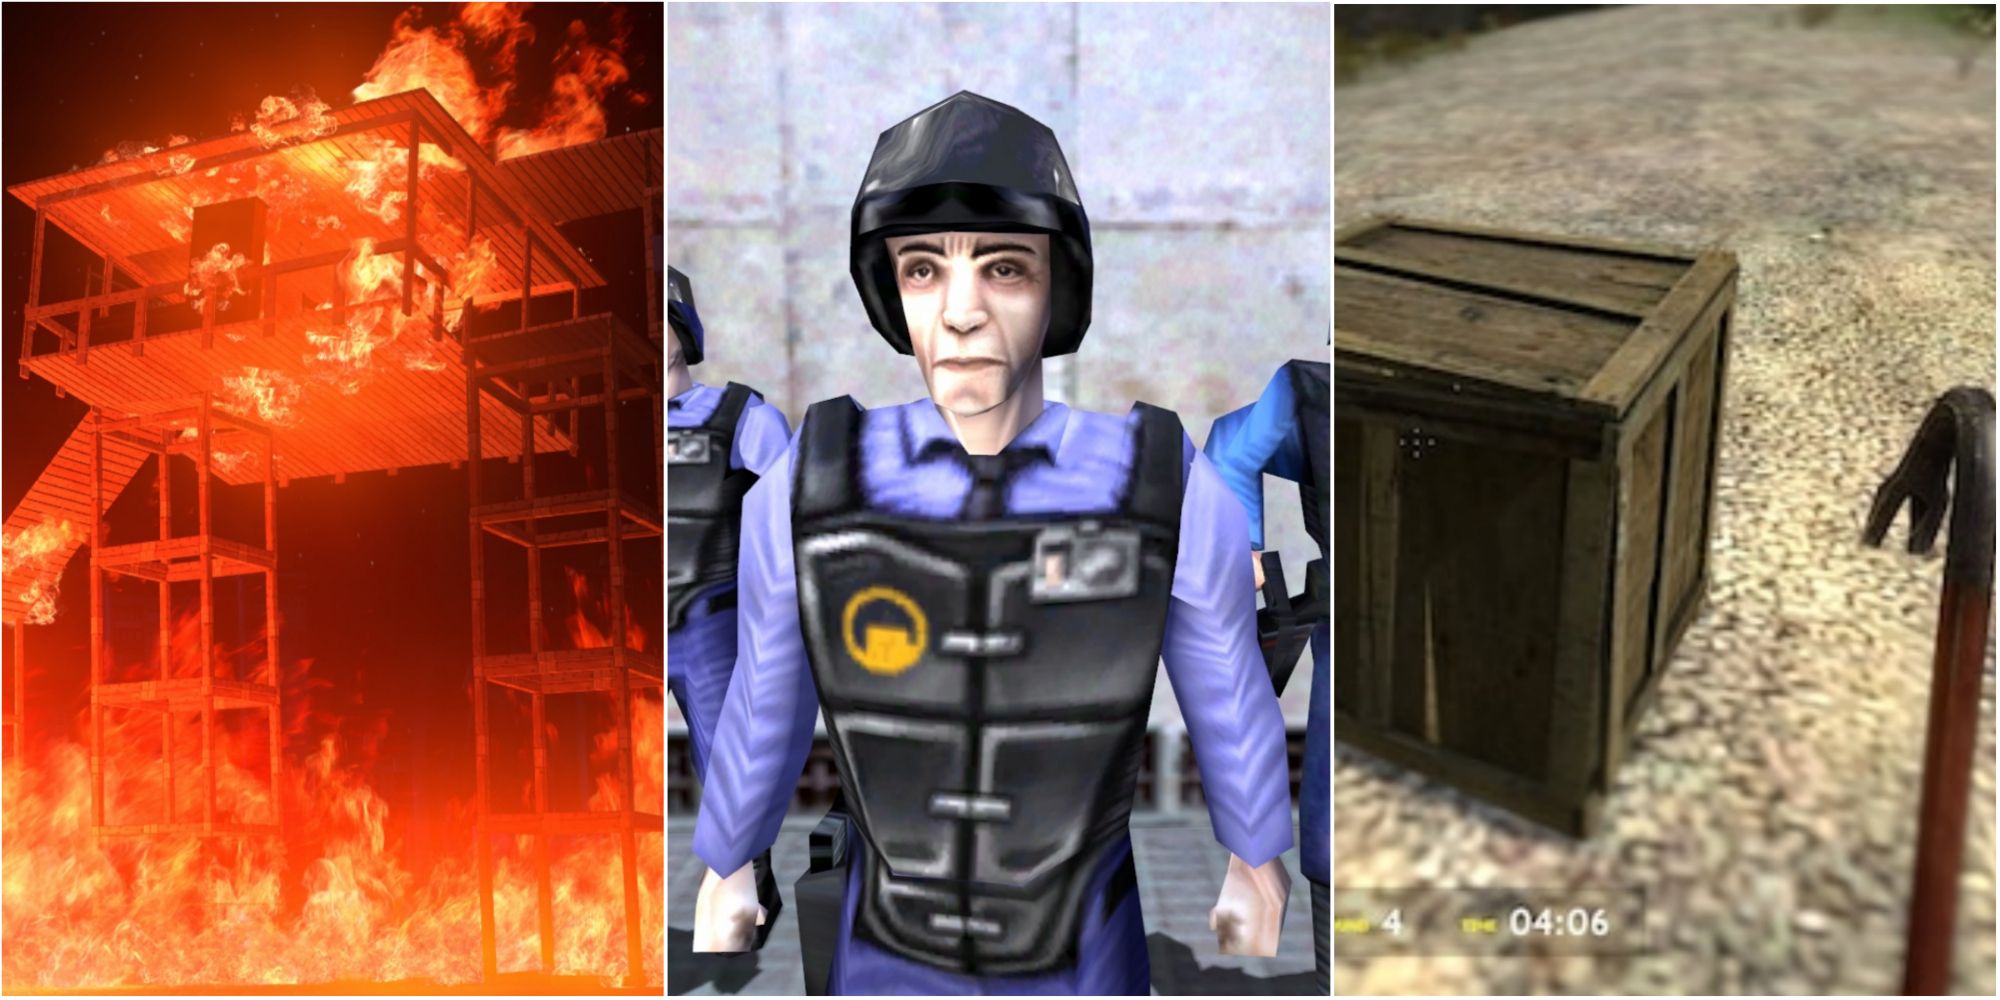 Three images from garry's mod, including a structure on fire, a police officer, and a wooden crate